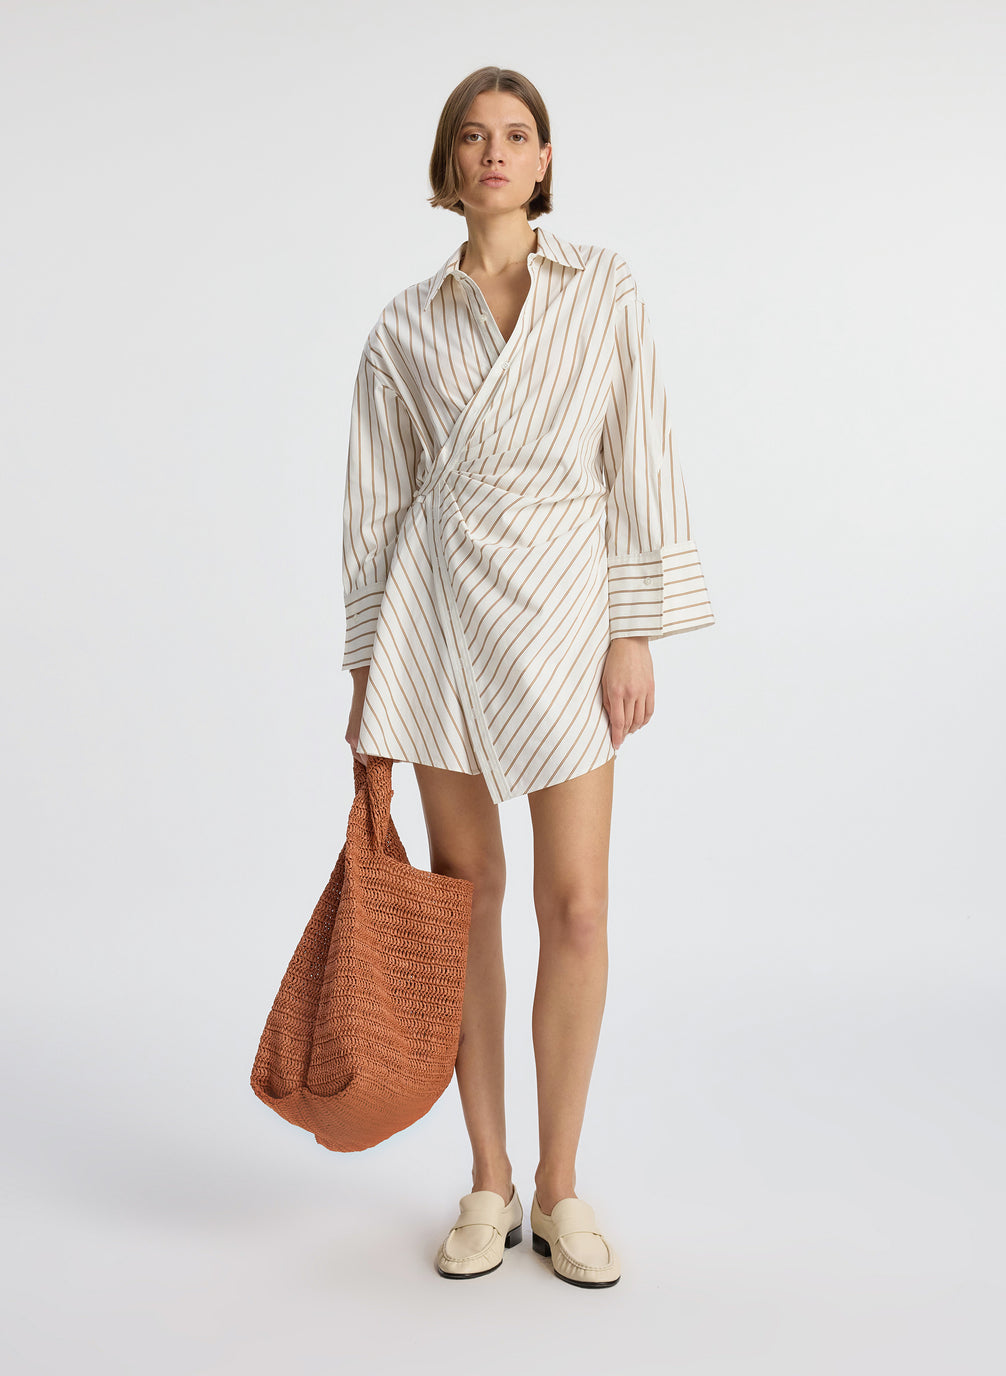 front view of woman wearing cream and brown striped wrapped shirtdress